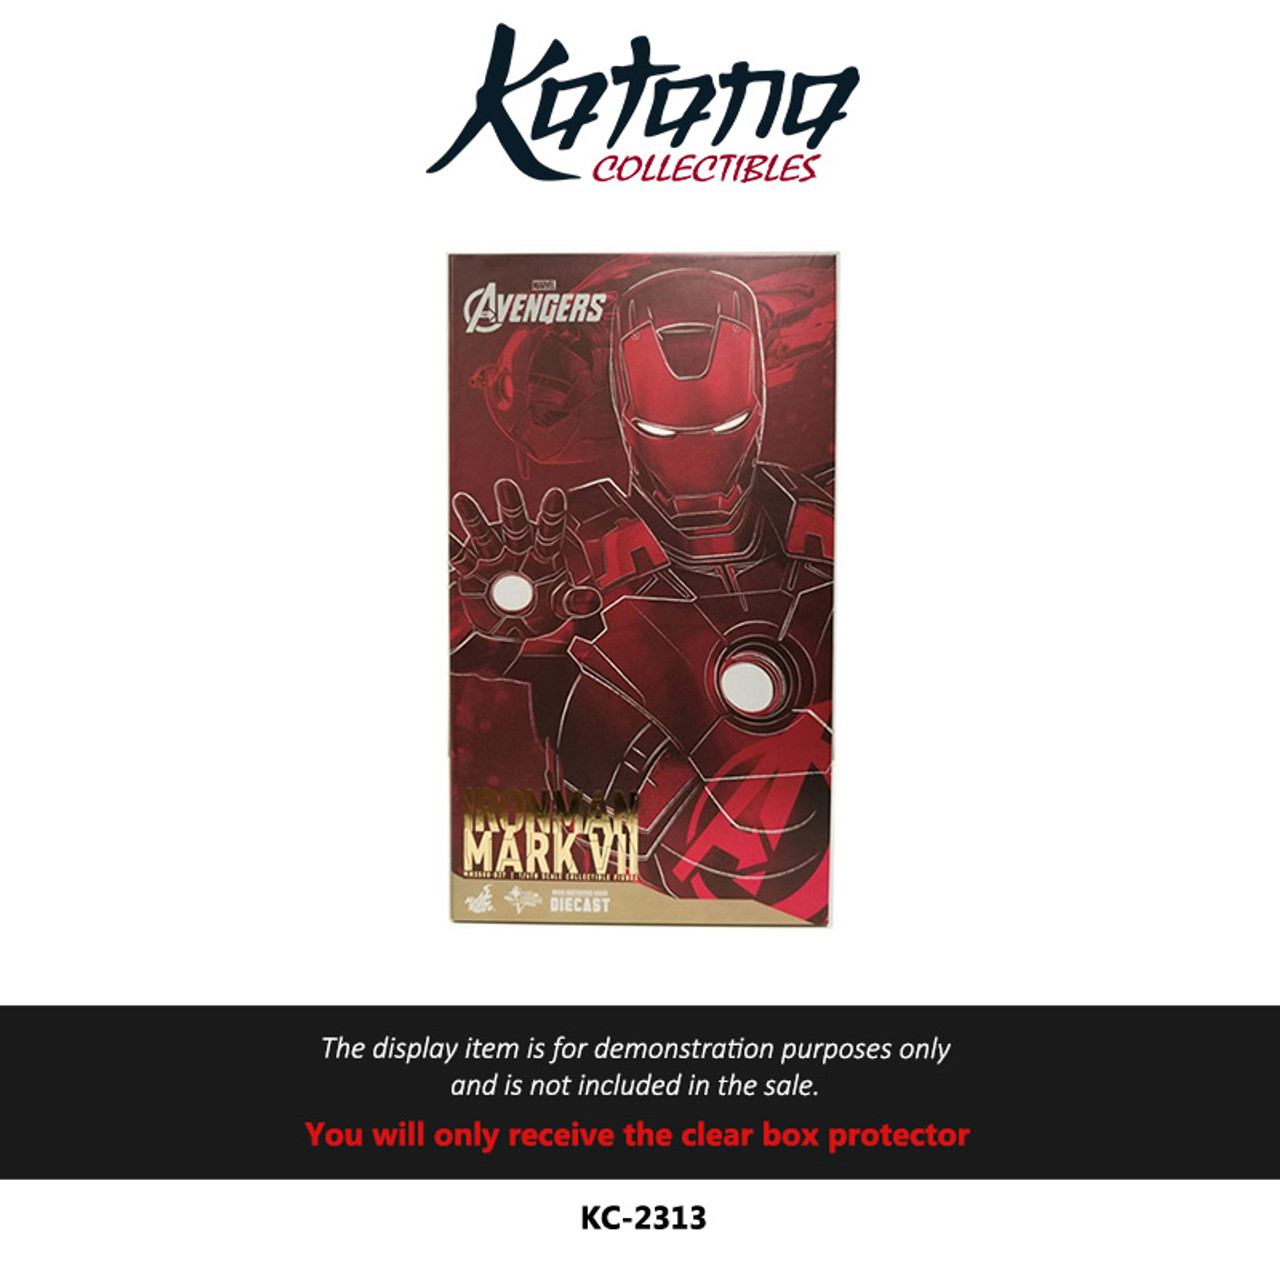 Katana Collectibles Protector For Hot Toys 1/6 Scale Iron Man Mark VII Diecast Figure